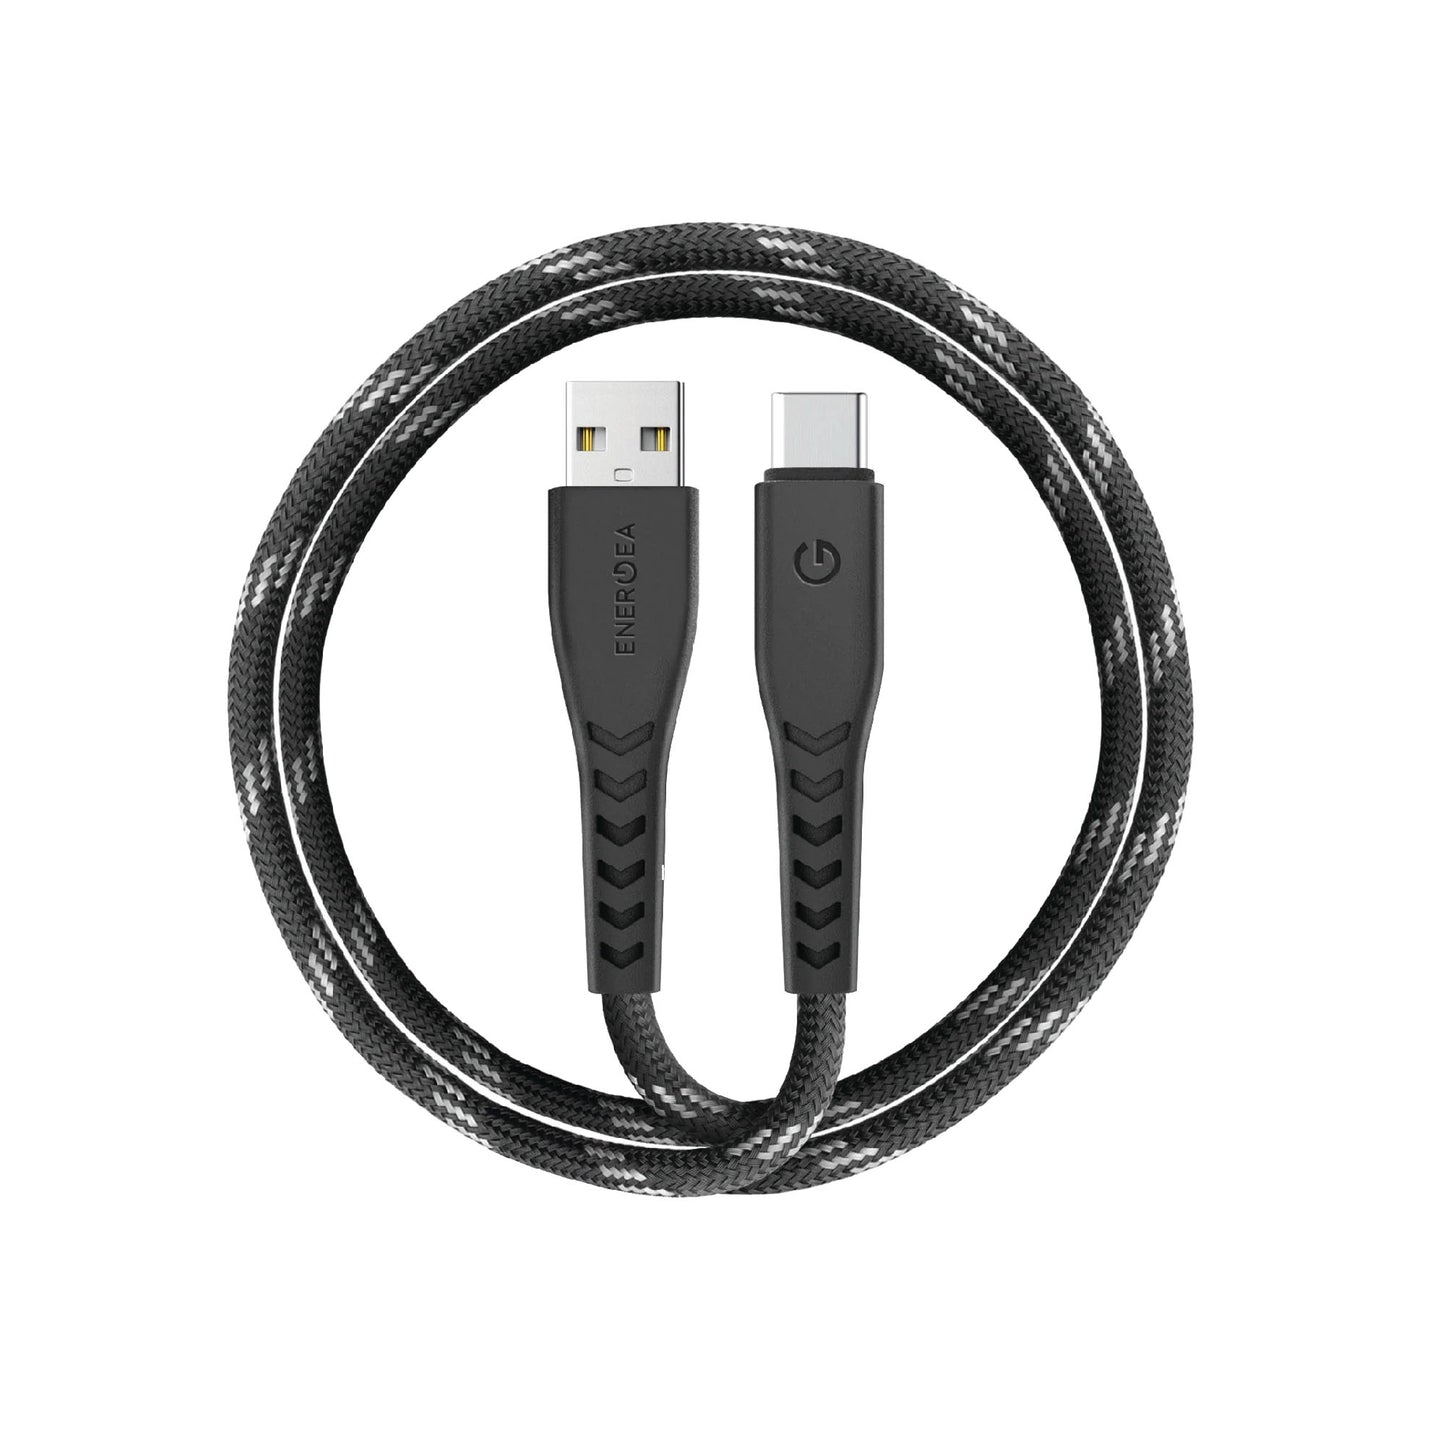 Energea NyloFlex USB-A to USB-C 5A High Speed Universal Cable 1.5M - Black